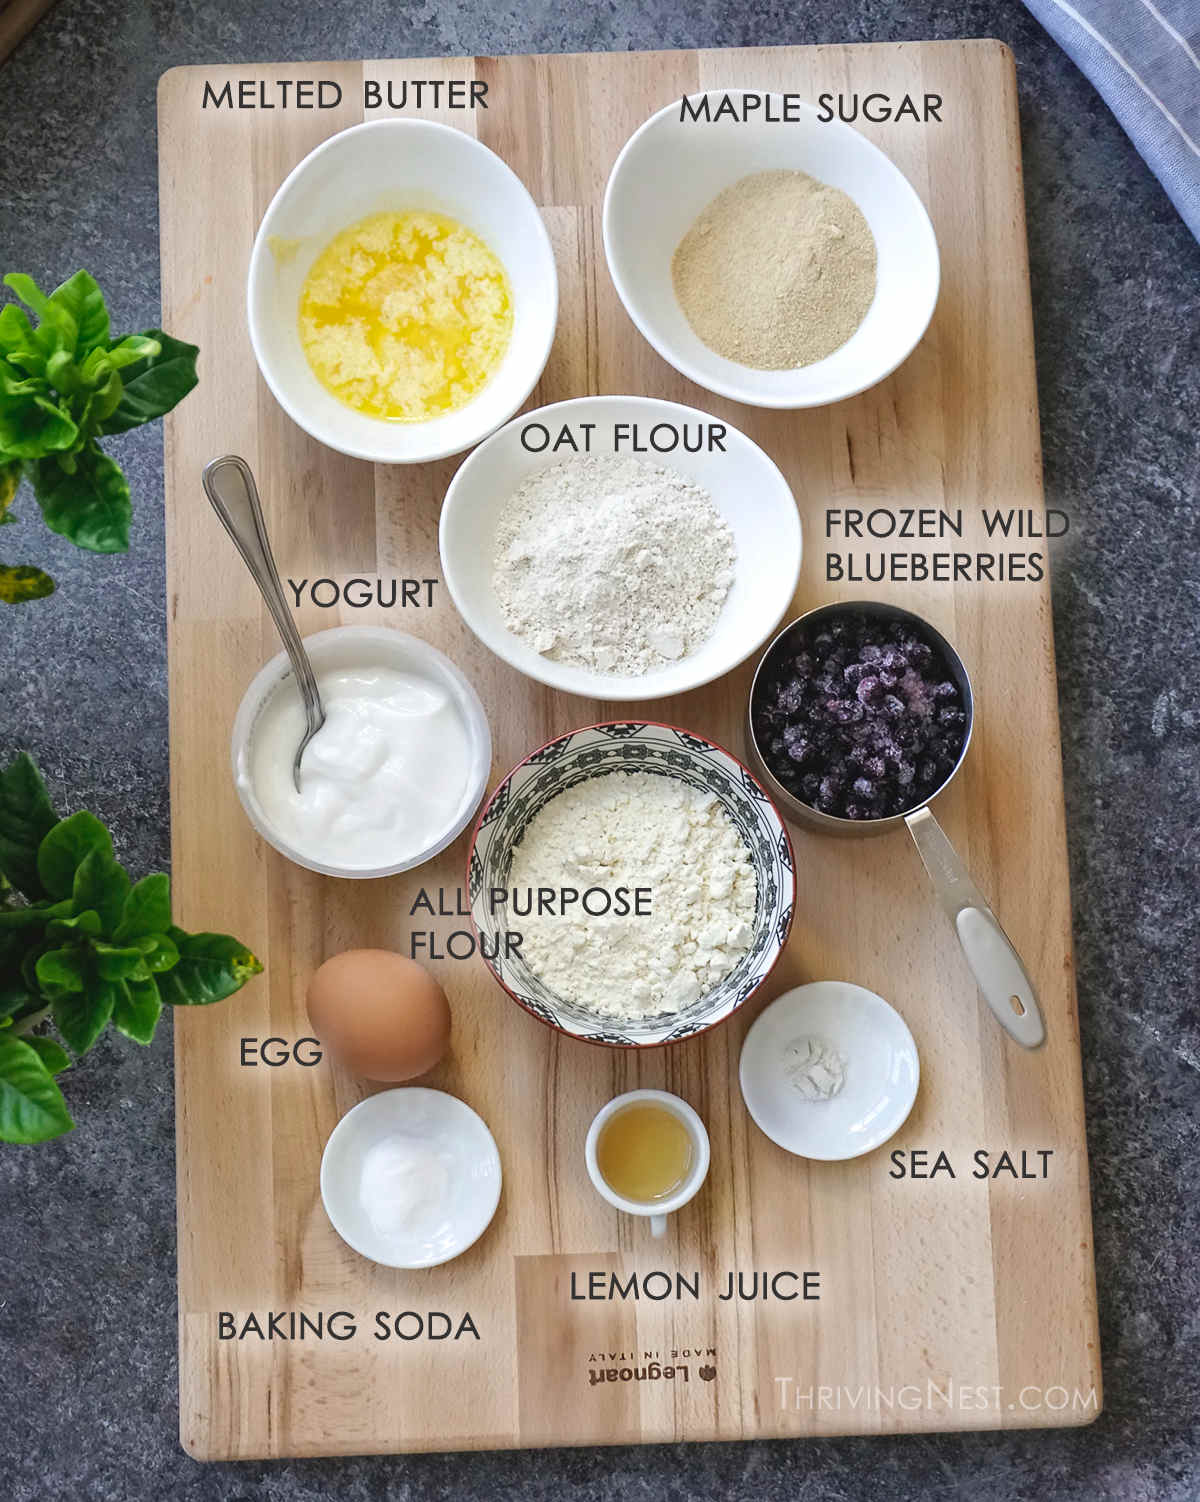 Ingredients for baby blueberry muffins recipe.